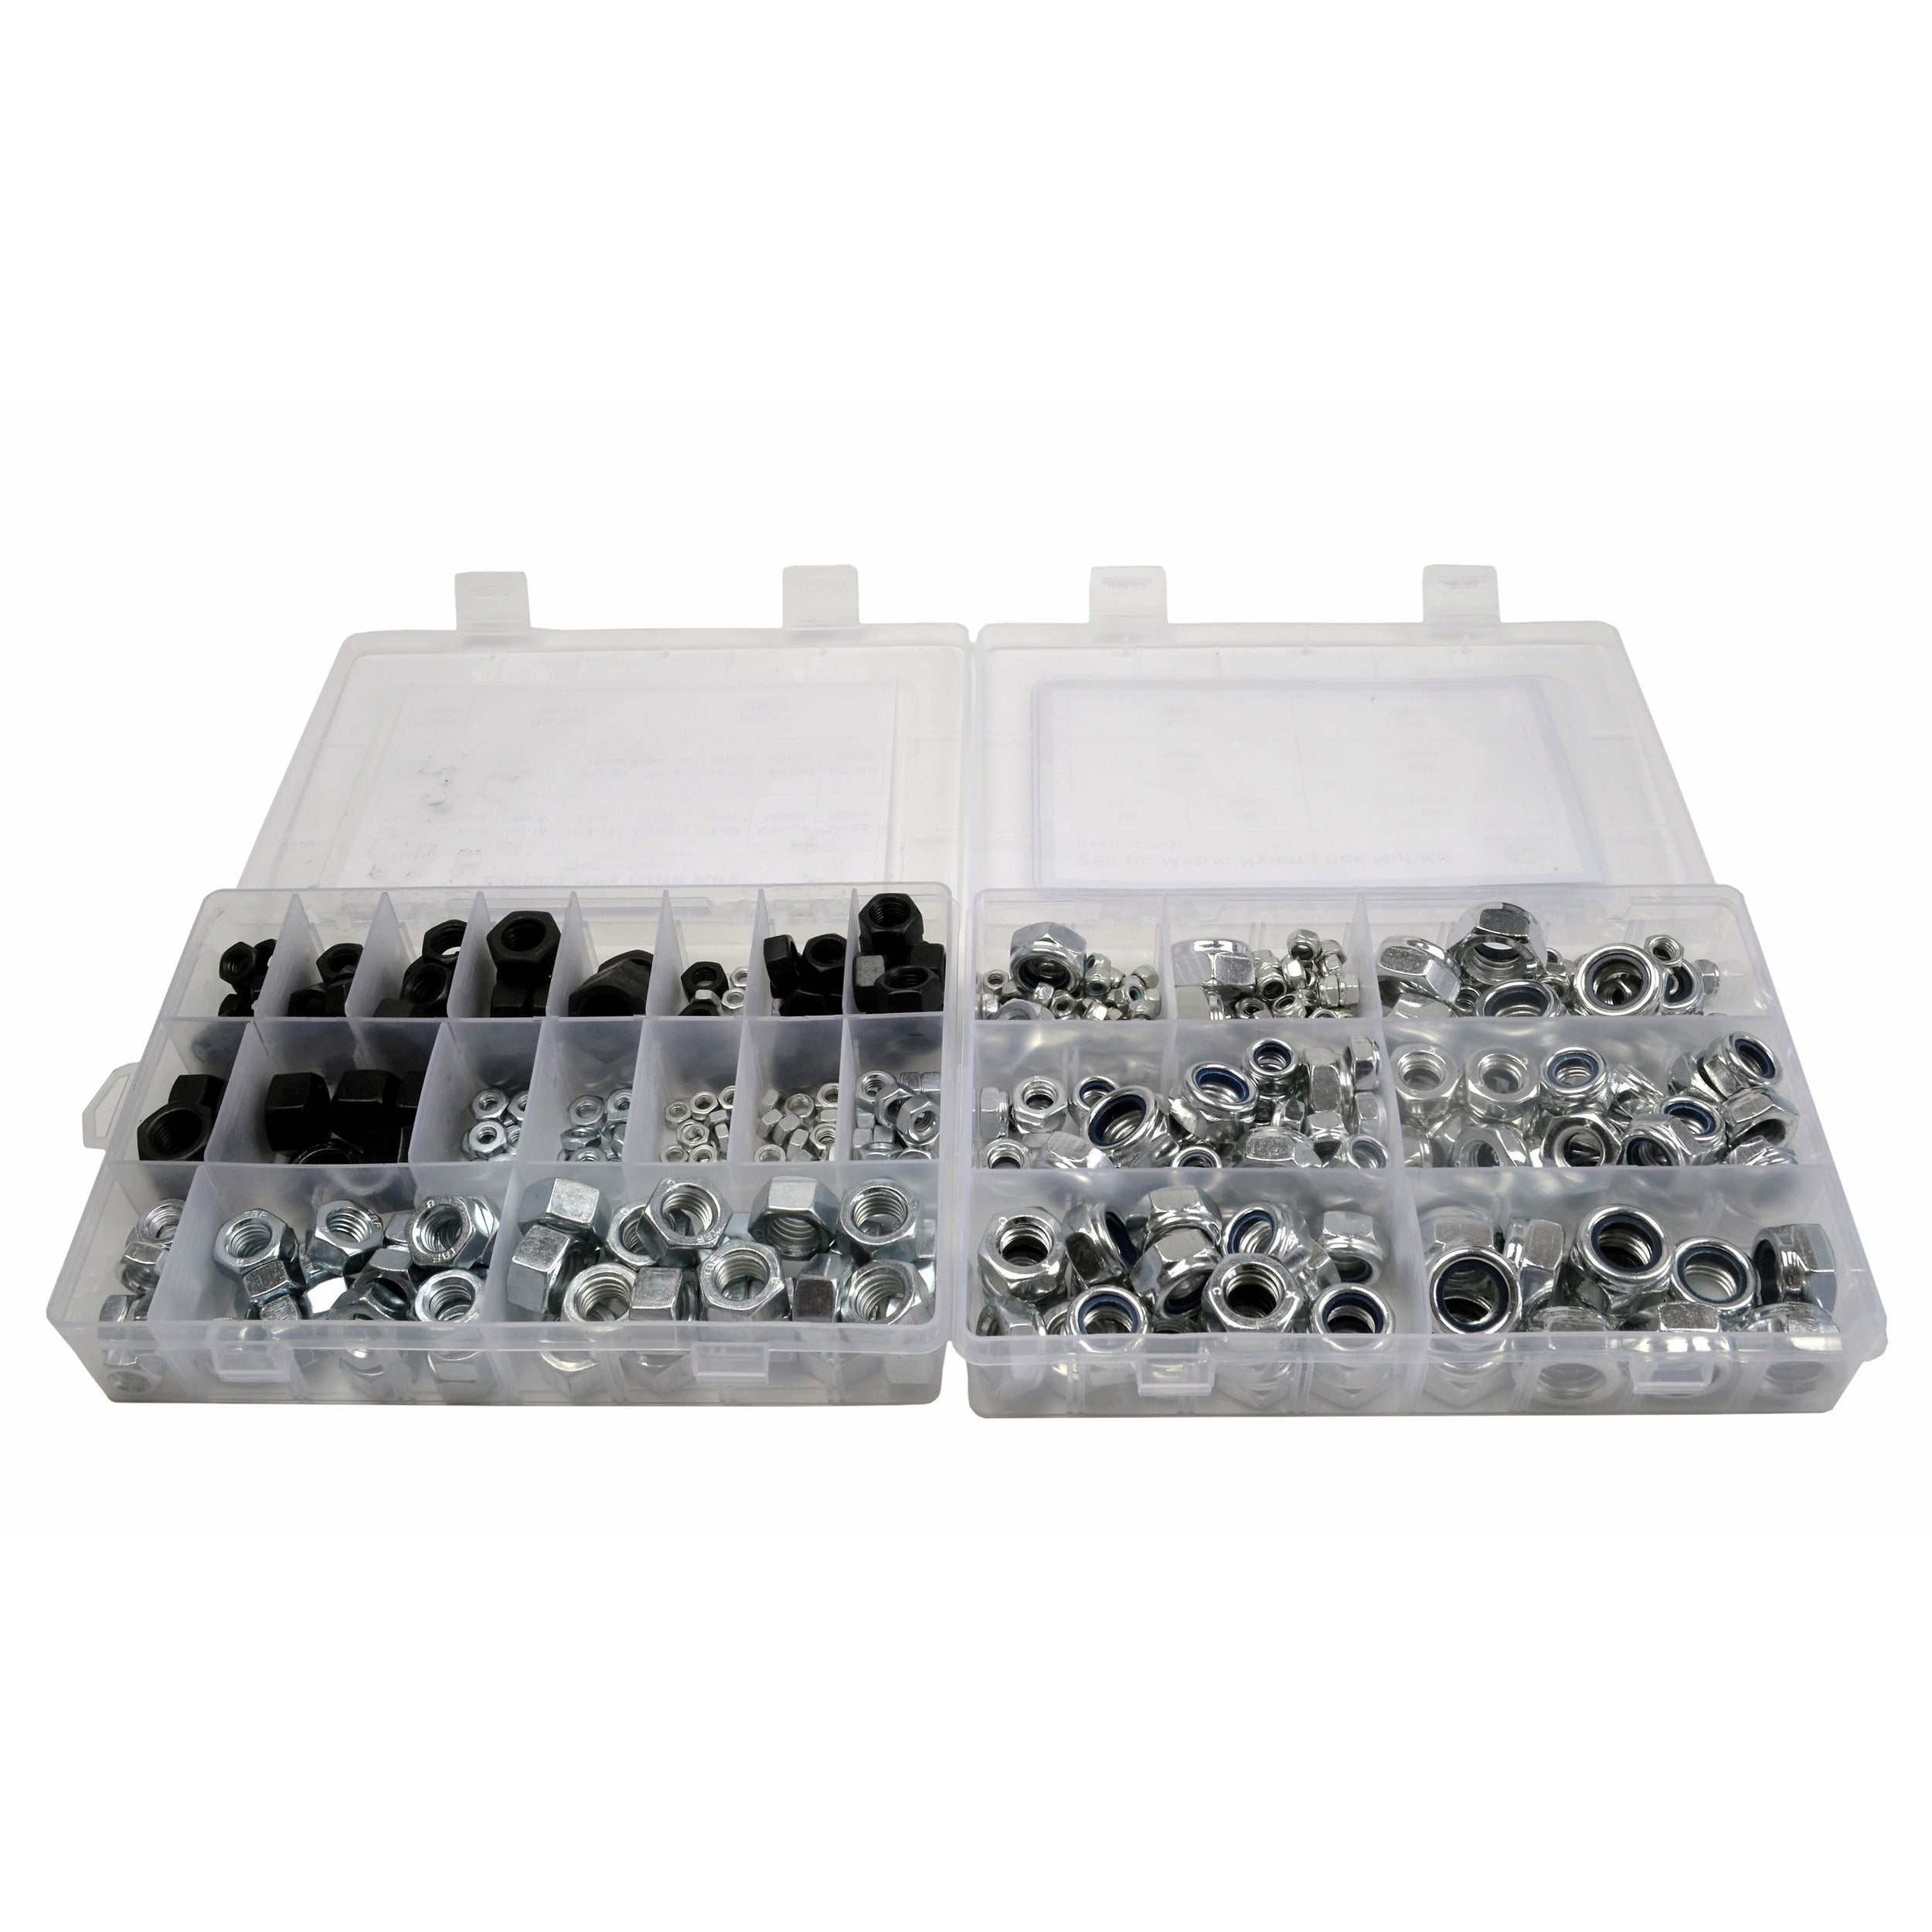 228 Piece Imperial Metric Nut Kit and 255 Piece Metric Nylock Nut Grab Kit Assortment